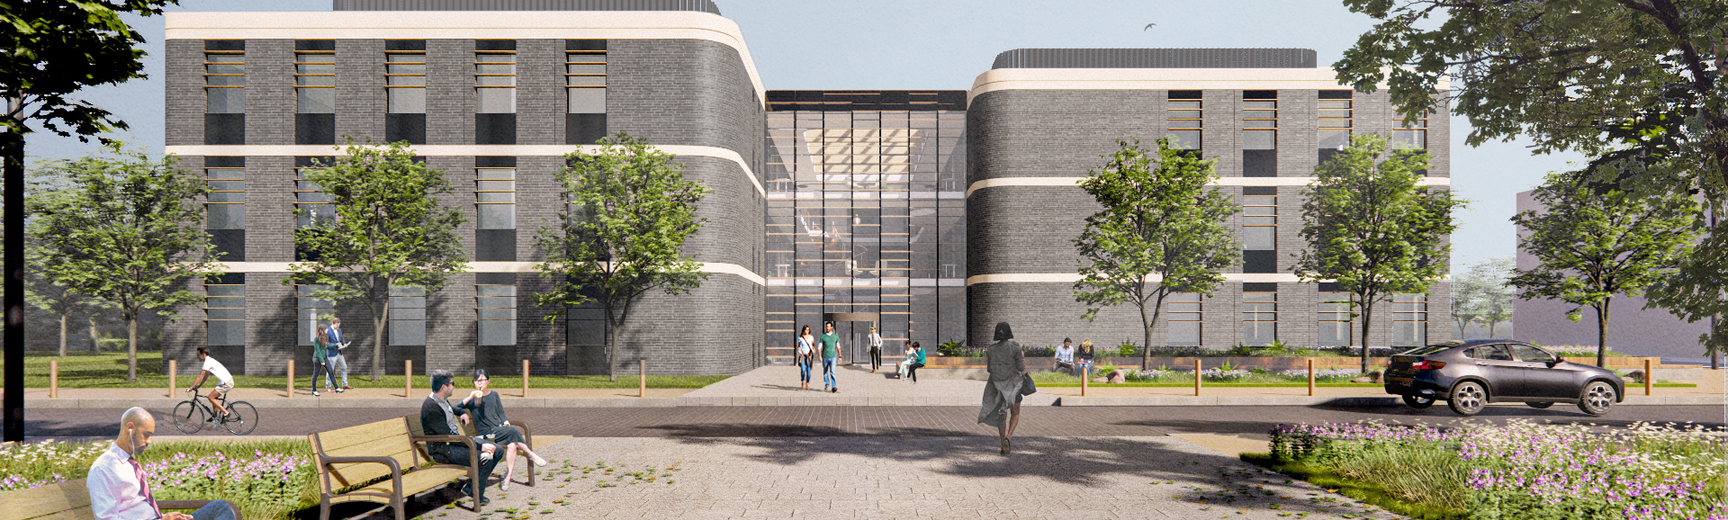 Artist's impression of the new commercial building as part of Begbroke Science Park expansion